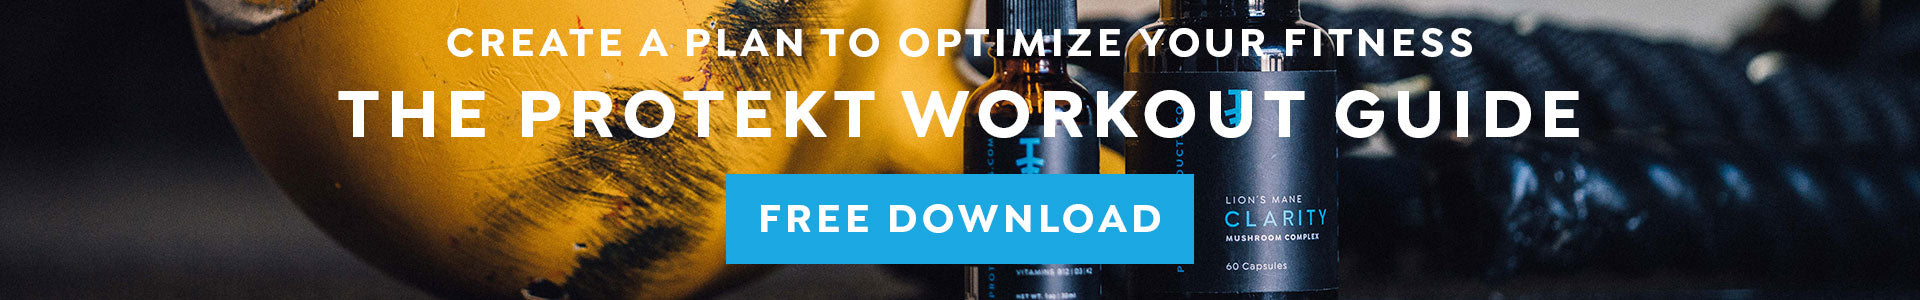 Download The Protekt Workout Guide